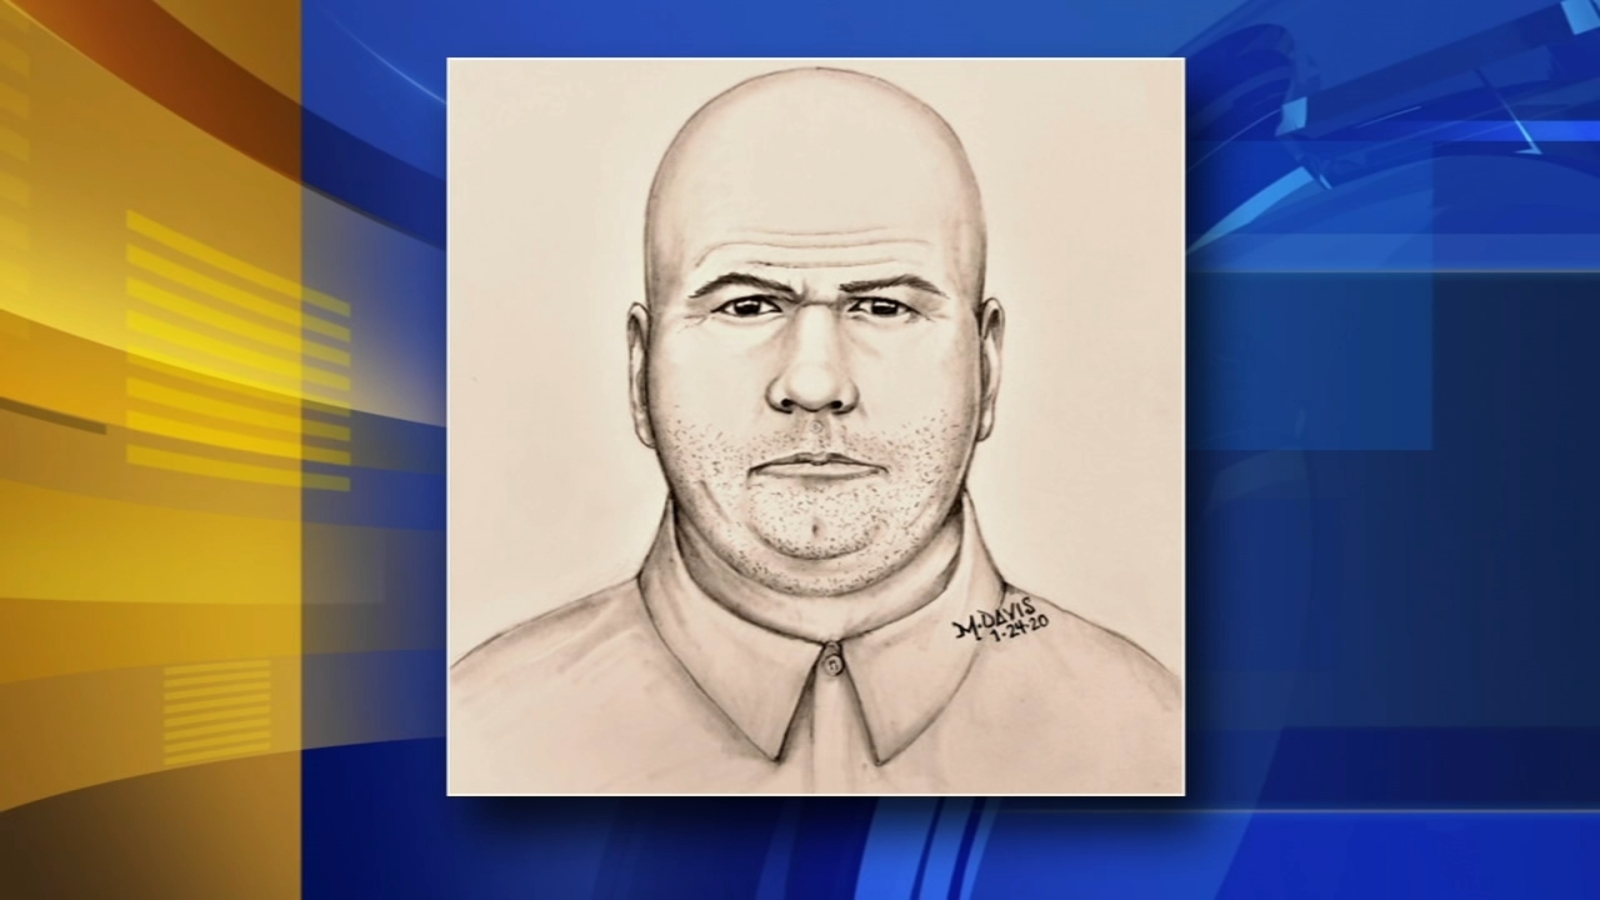  Woman violently attacked inside Chester County home by man posing as contractor: Police 